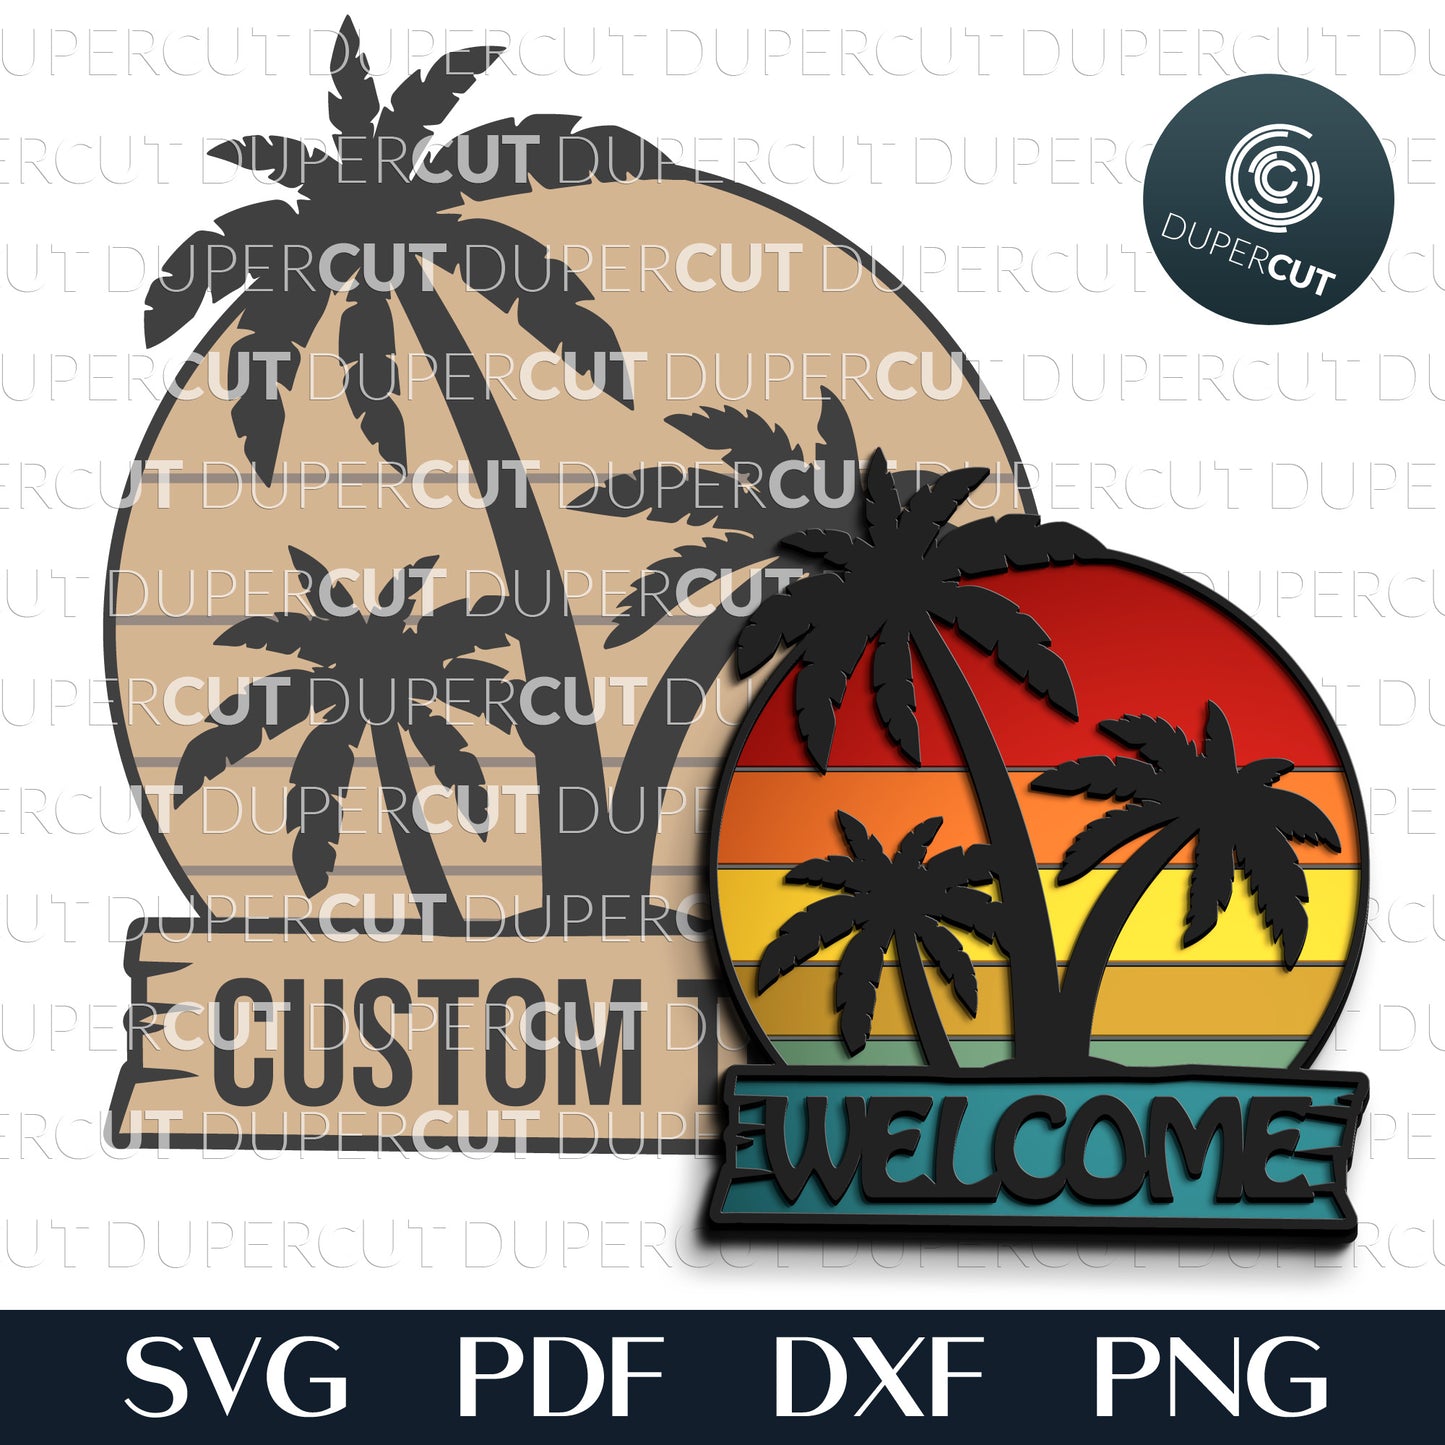 Palm trees welcome beach sign - SVG DXF layered cutting files for Glowforge, Cricut, Silhouette, CNC plasma machines pattern by DuperCut